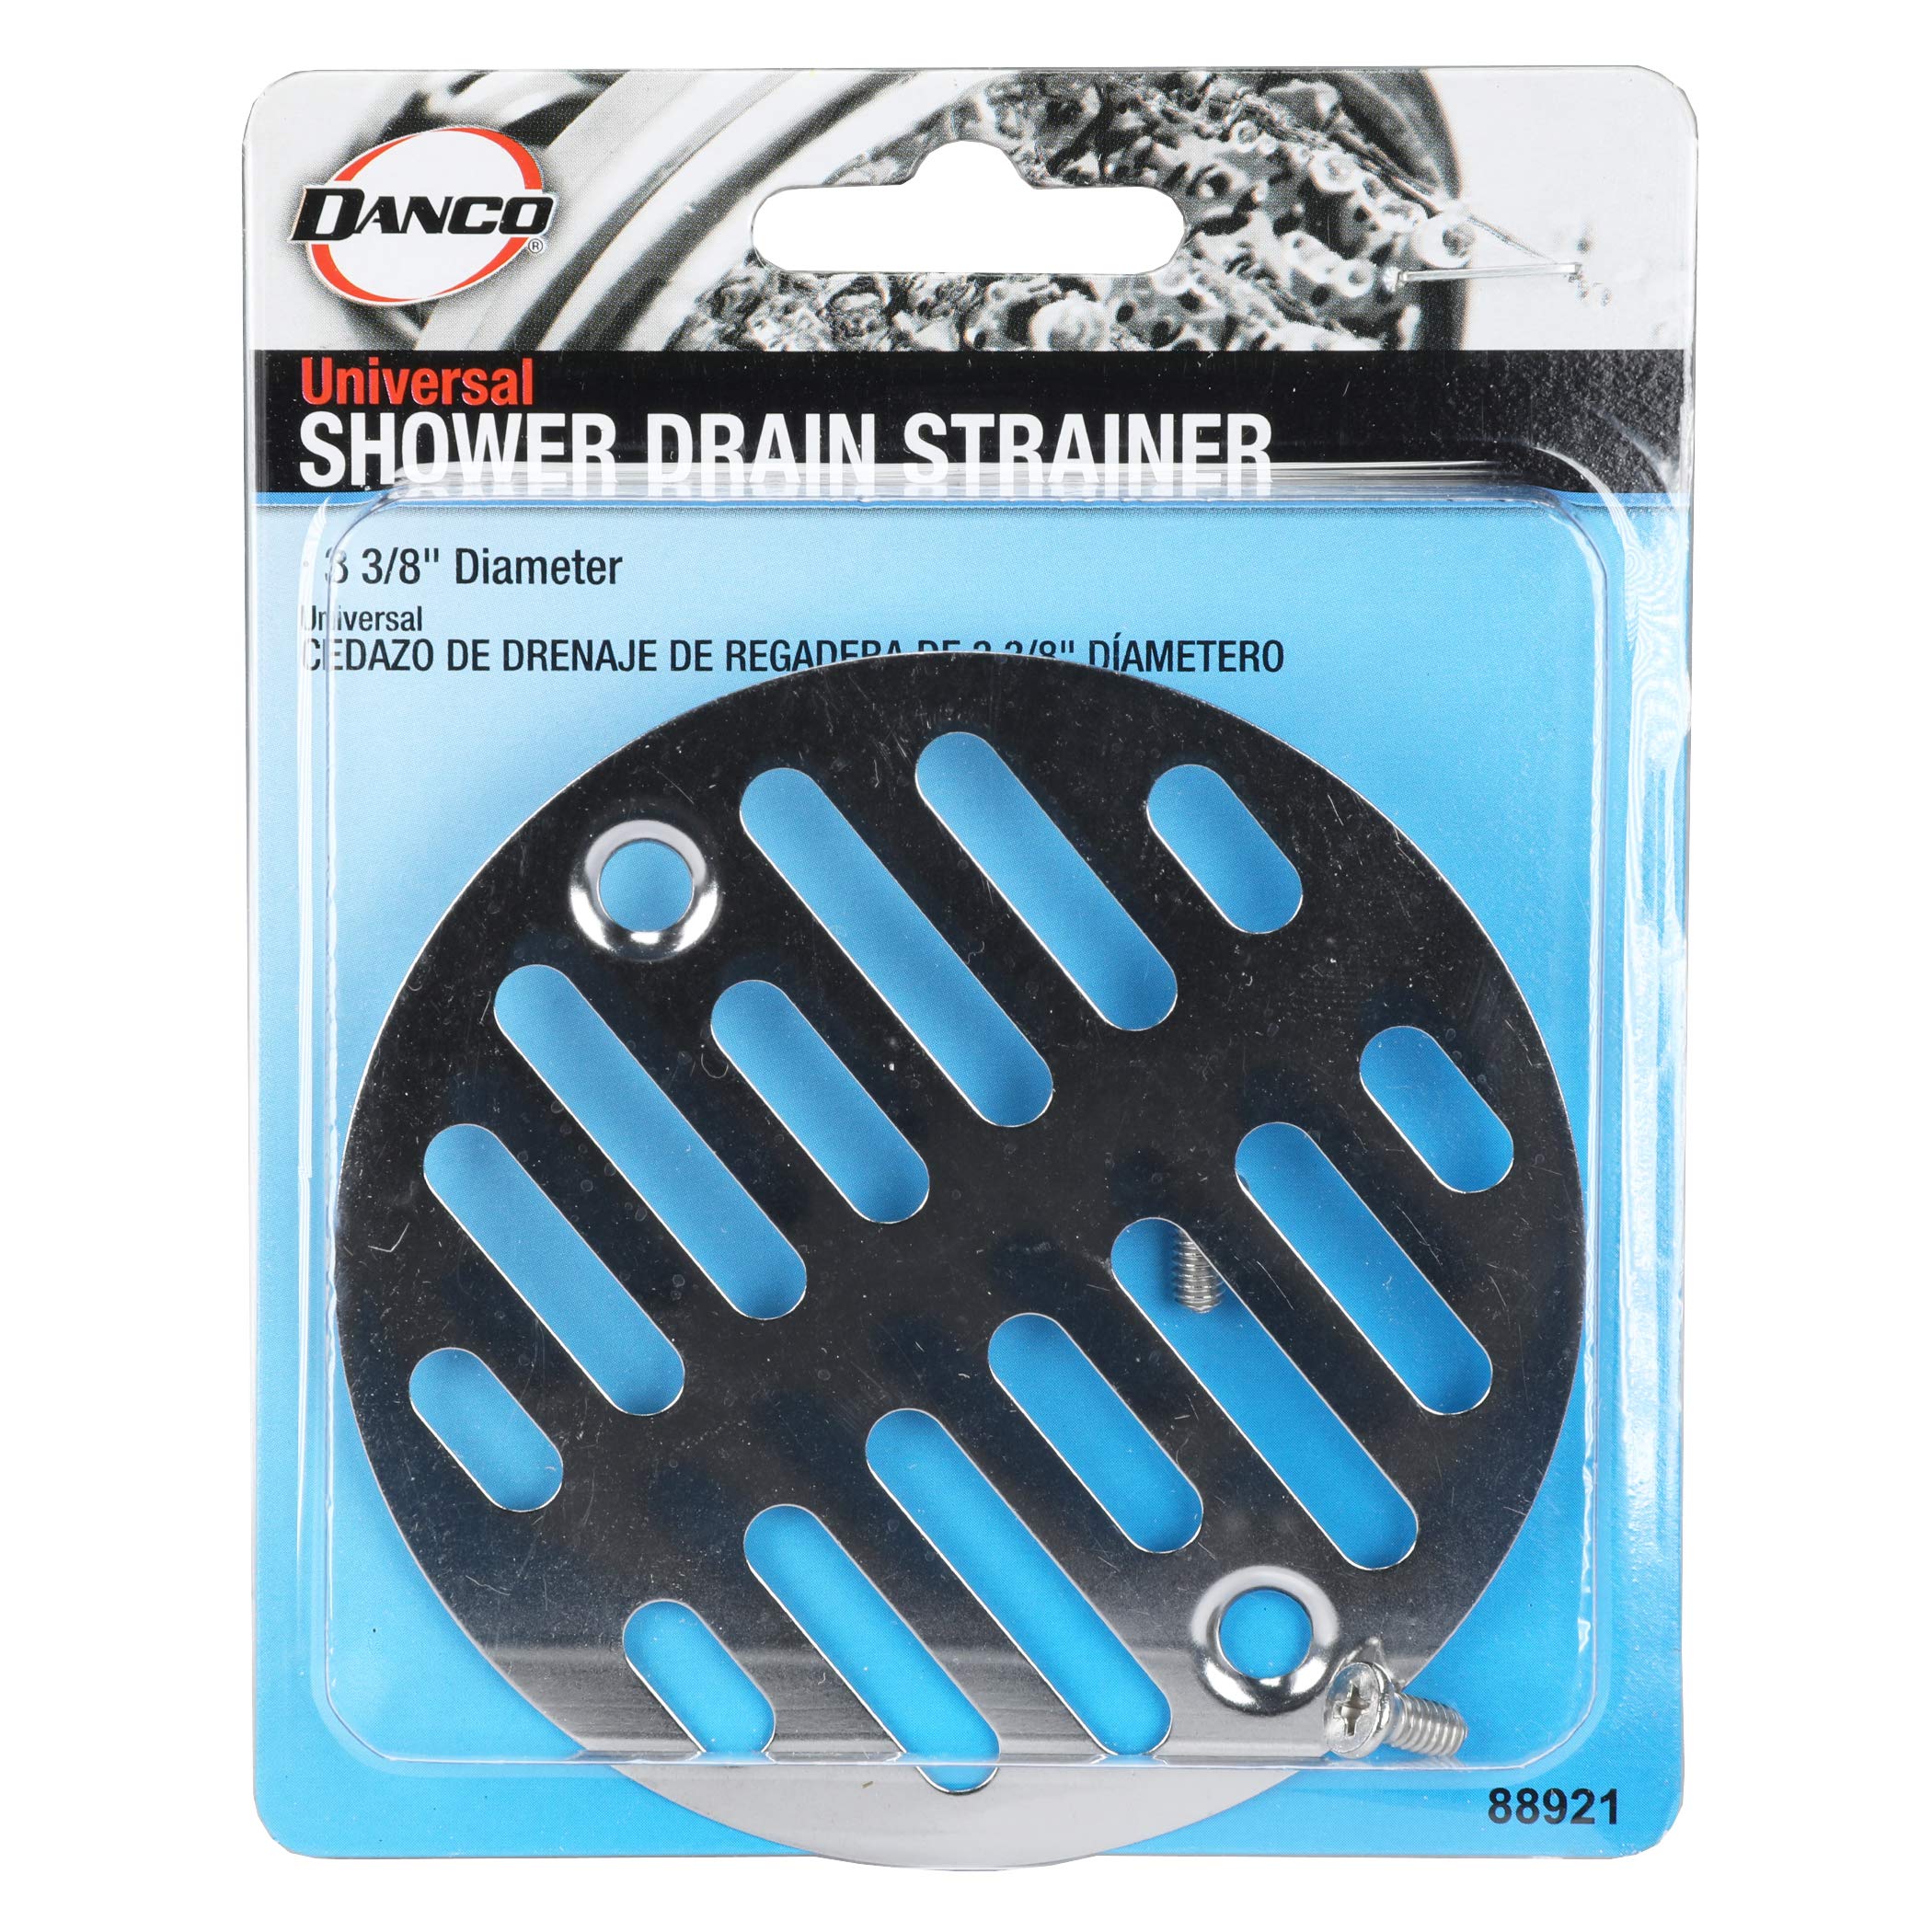 Danco 88921 Slotted Design Shower Drain Strainer, For Use With 3-3/8 in Shower Drains, Steel, Chrome Plated